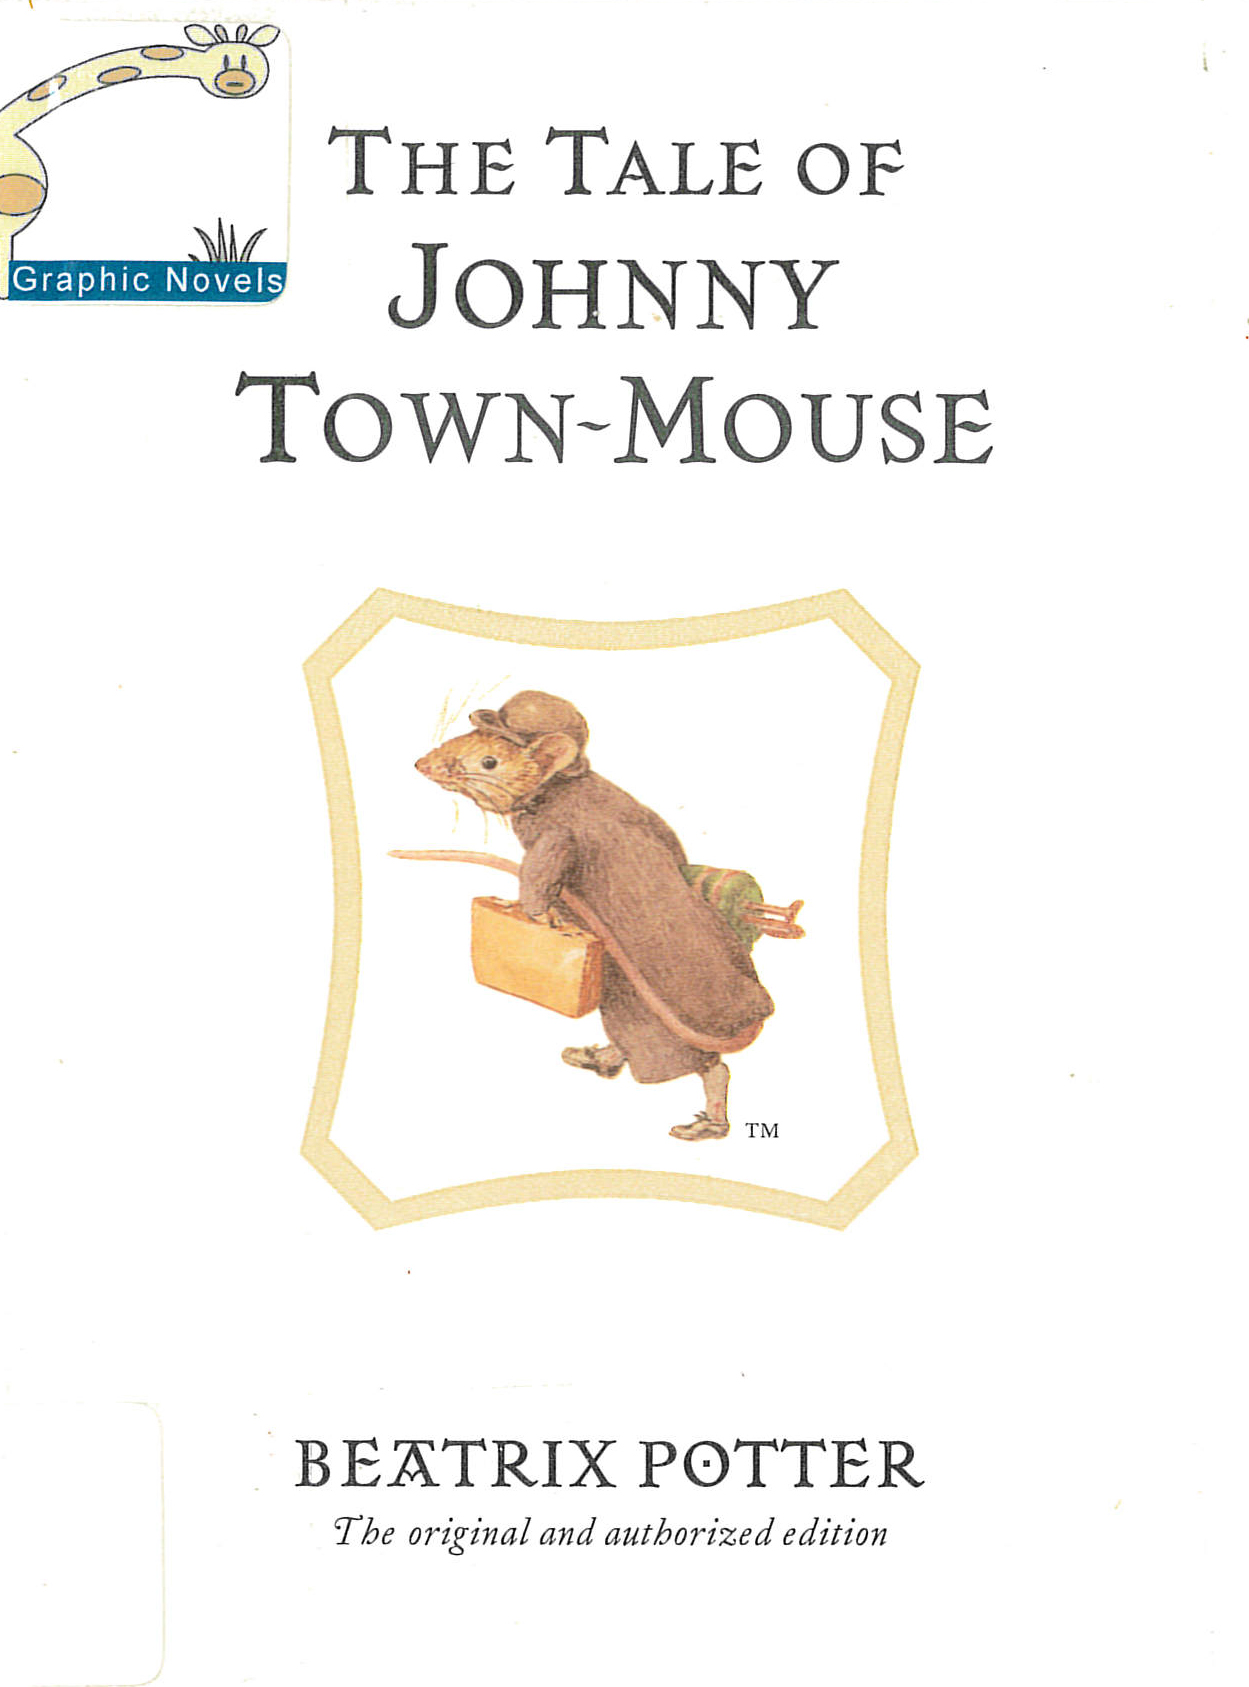 The tale of Johnny Town-Mouse